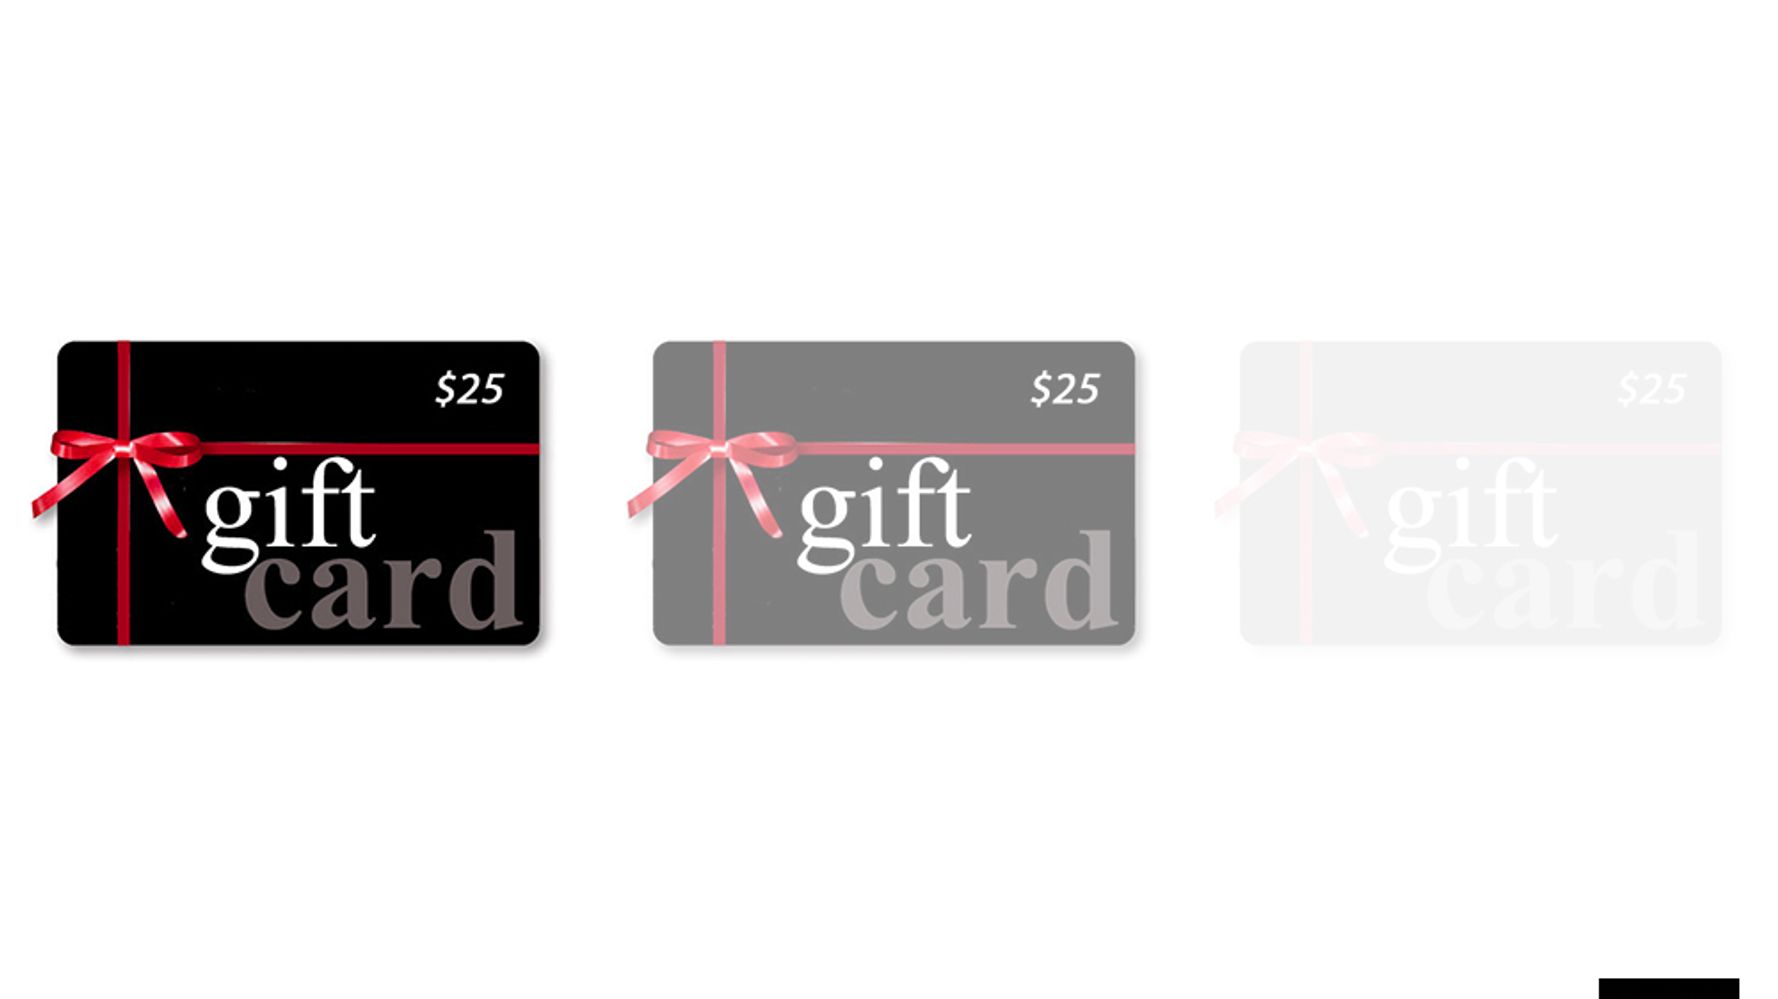 Billions of dollars are locked up in a present that's easily given and  forgotten -- gift cards